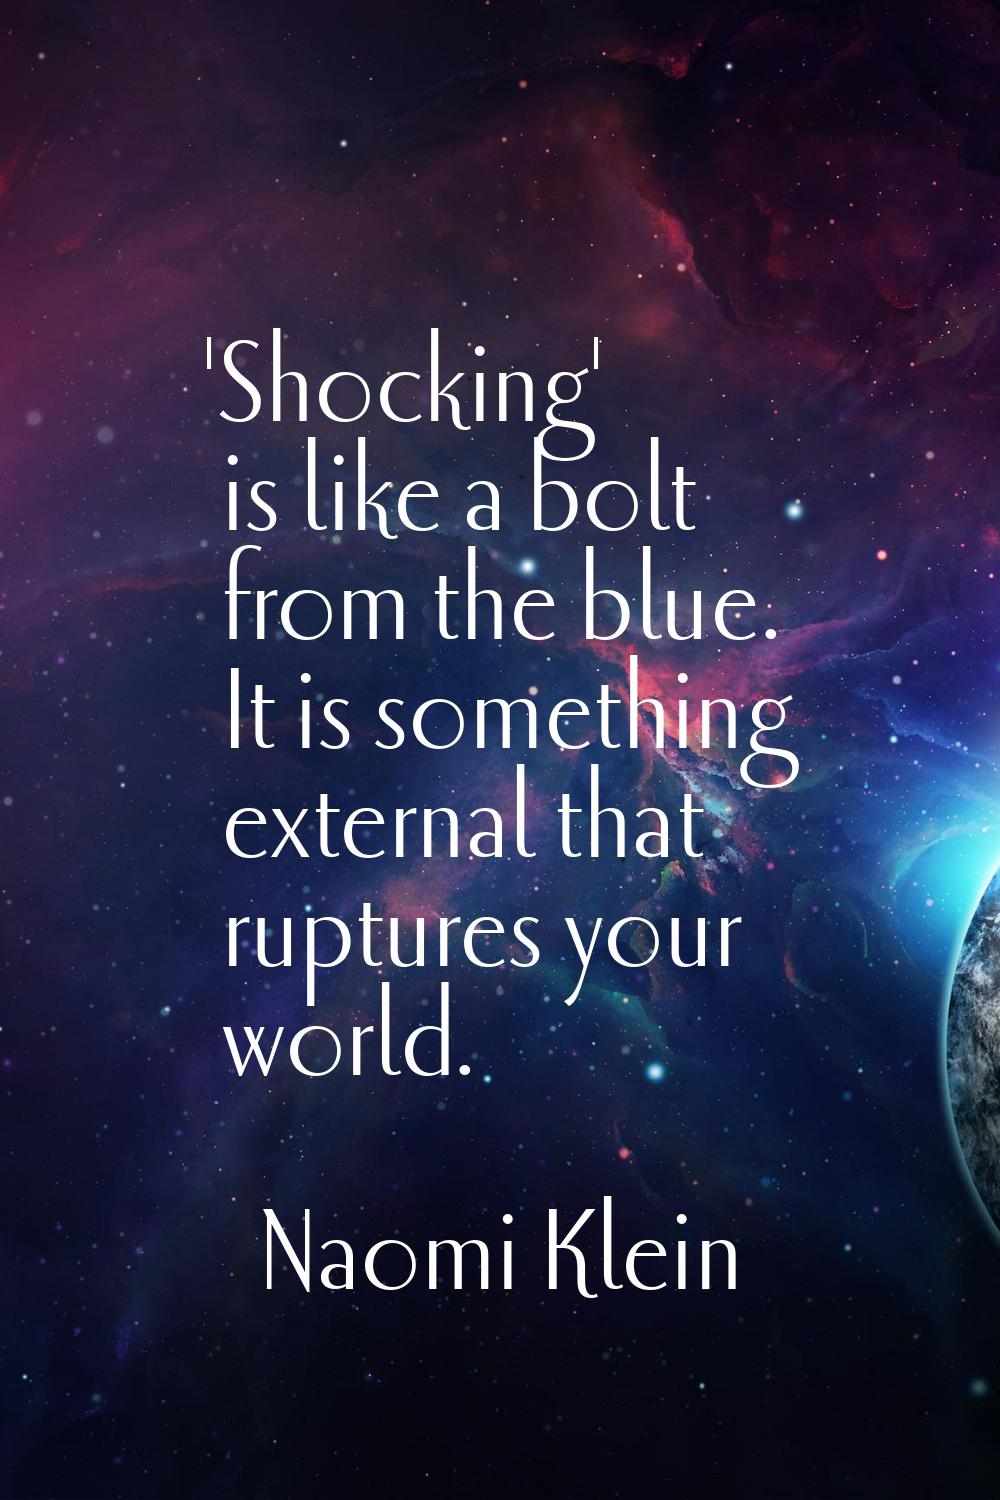 'Shocking' is like a bolt from the blue. It is something external that ruptures your world.